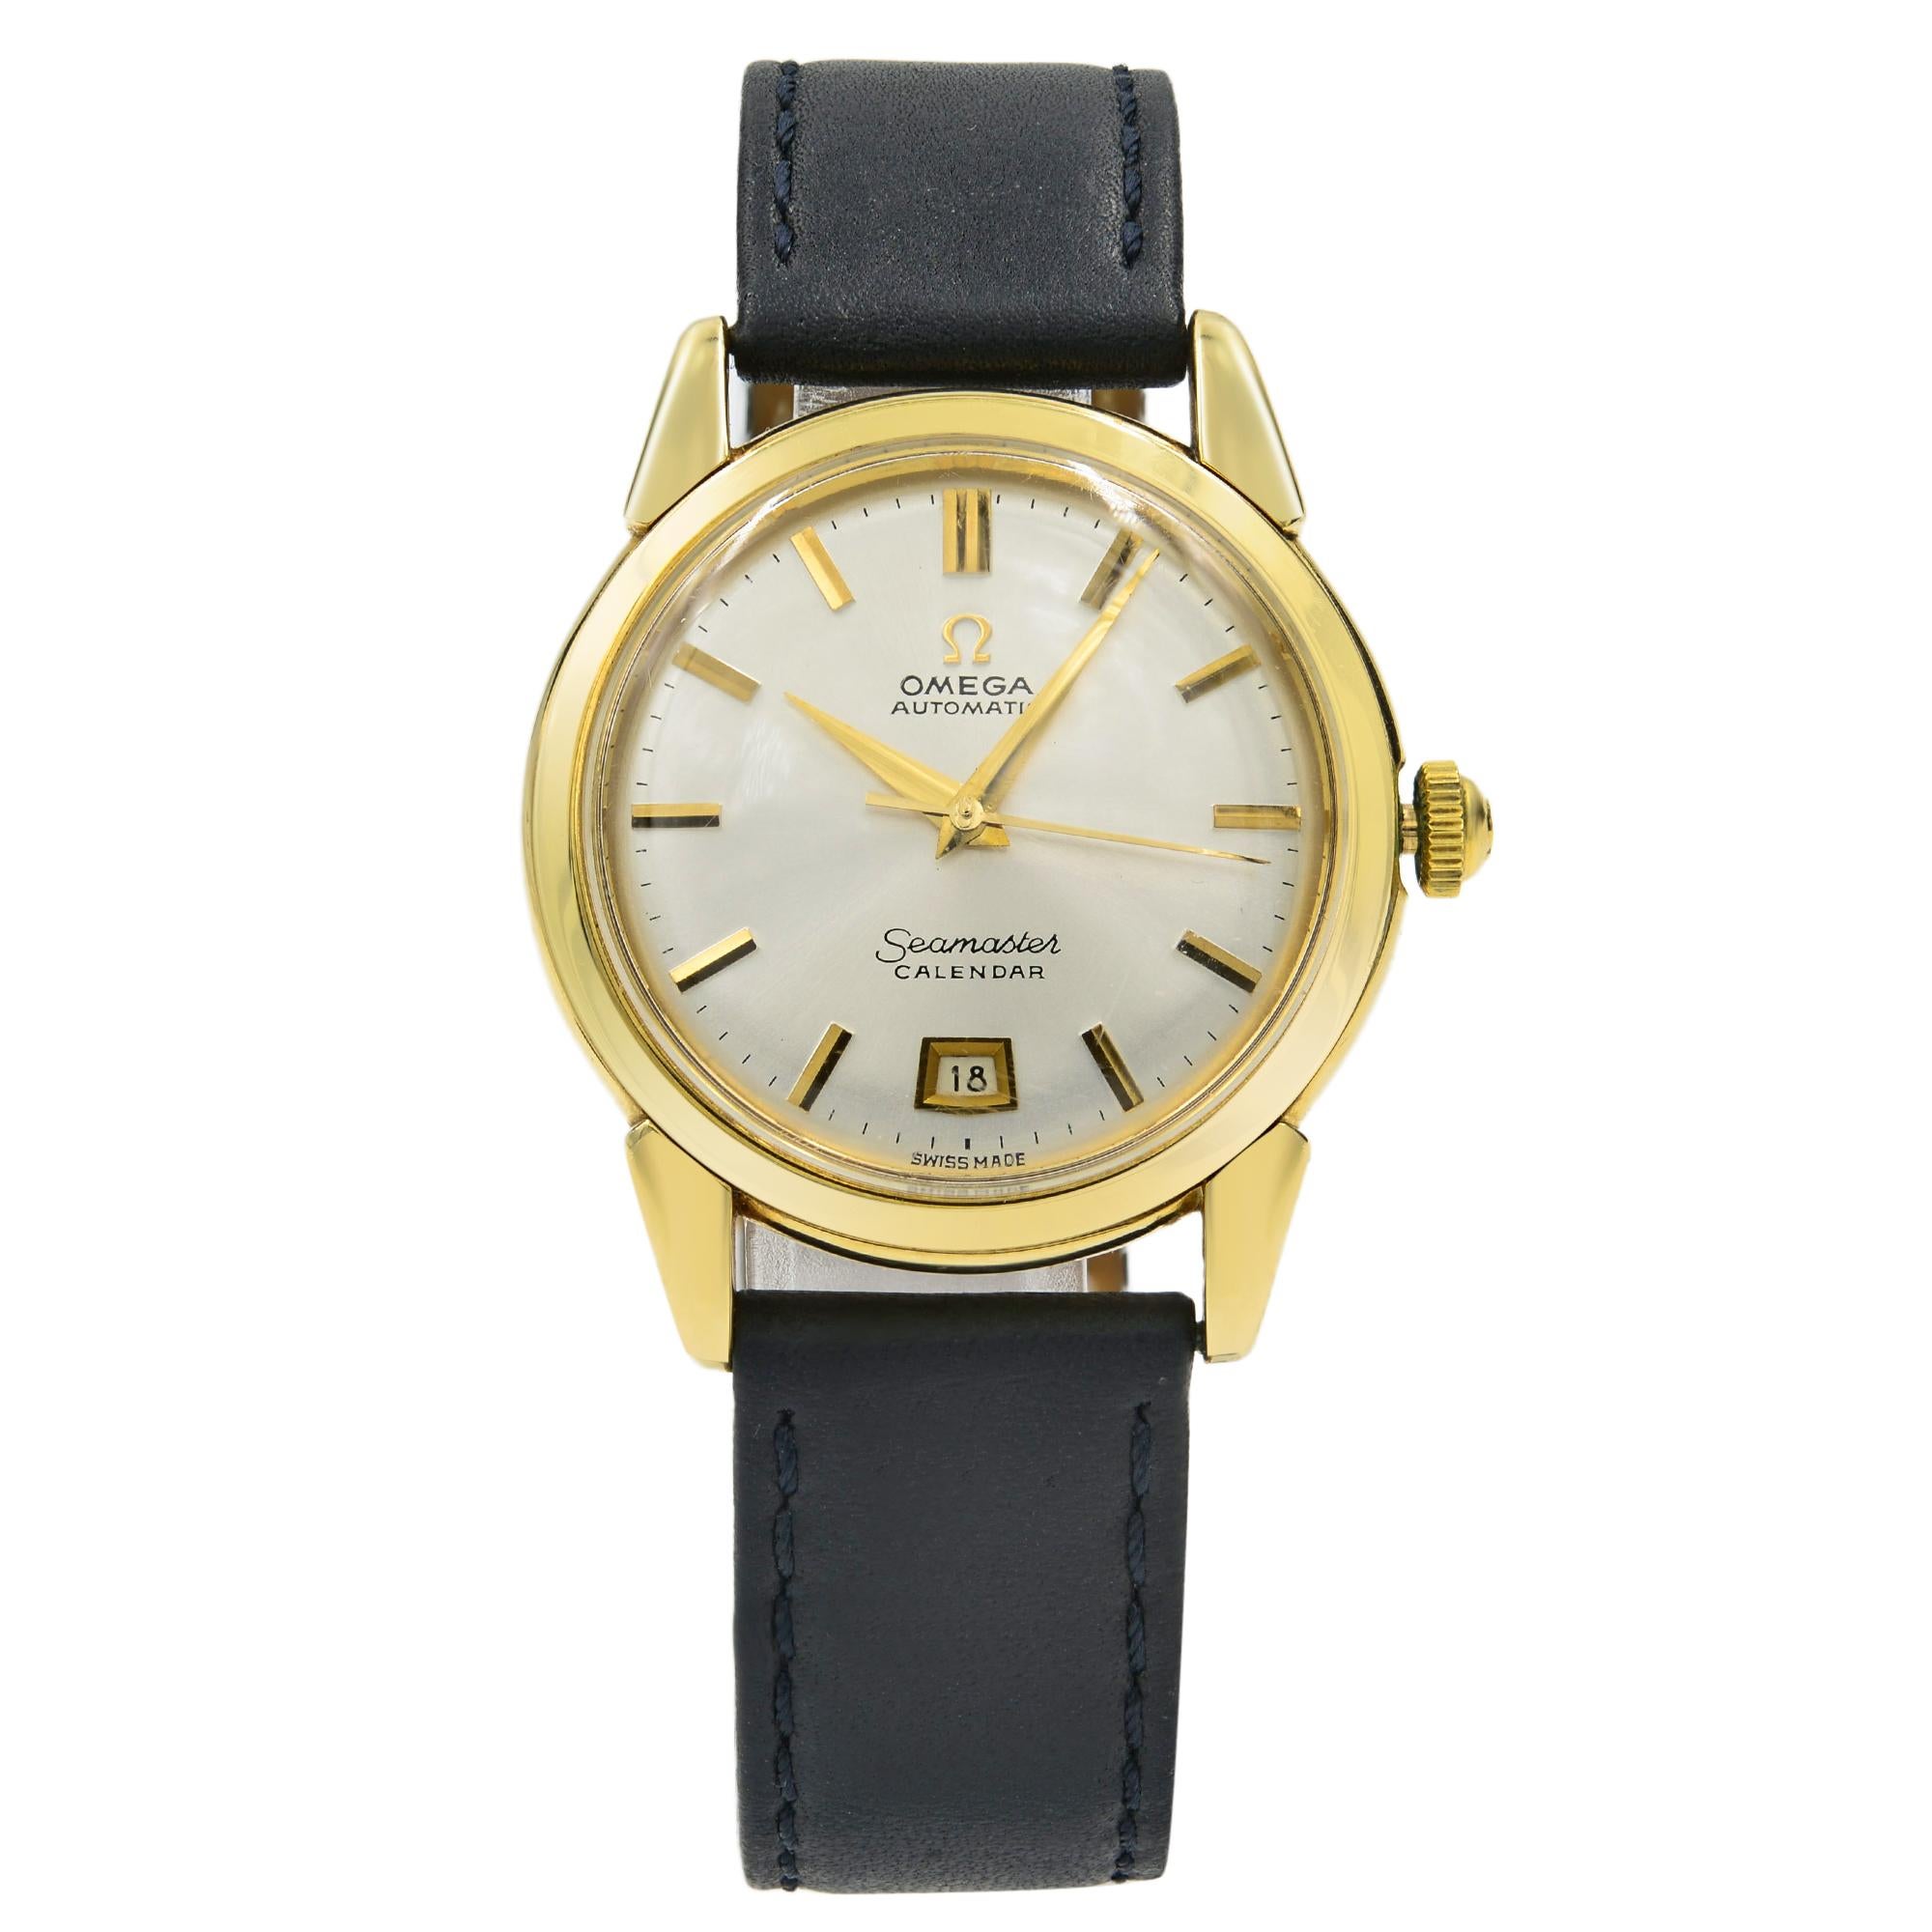 This pre-owned Omega Seamaster N/A is a beautiful Unisex timepiece that is powered by an automatic movement which is cased in a yellow gold case. It has a round shape face, date dial, and has hand sticks style markers. It is completed with a leather